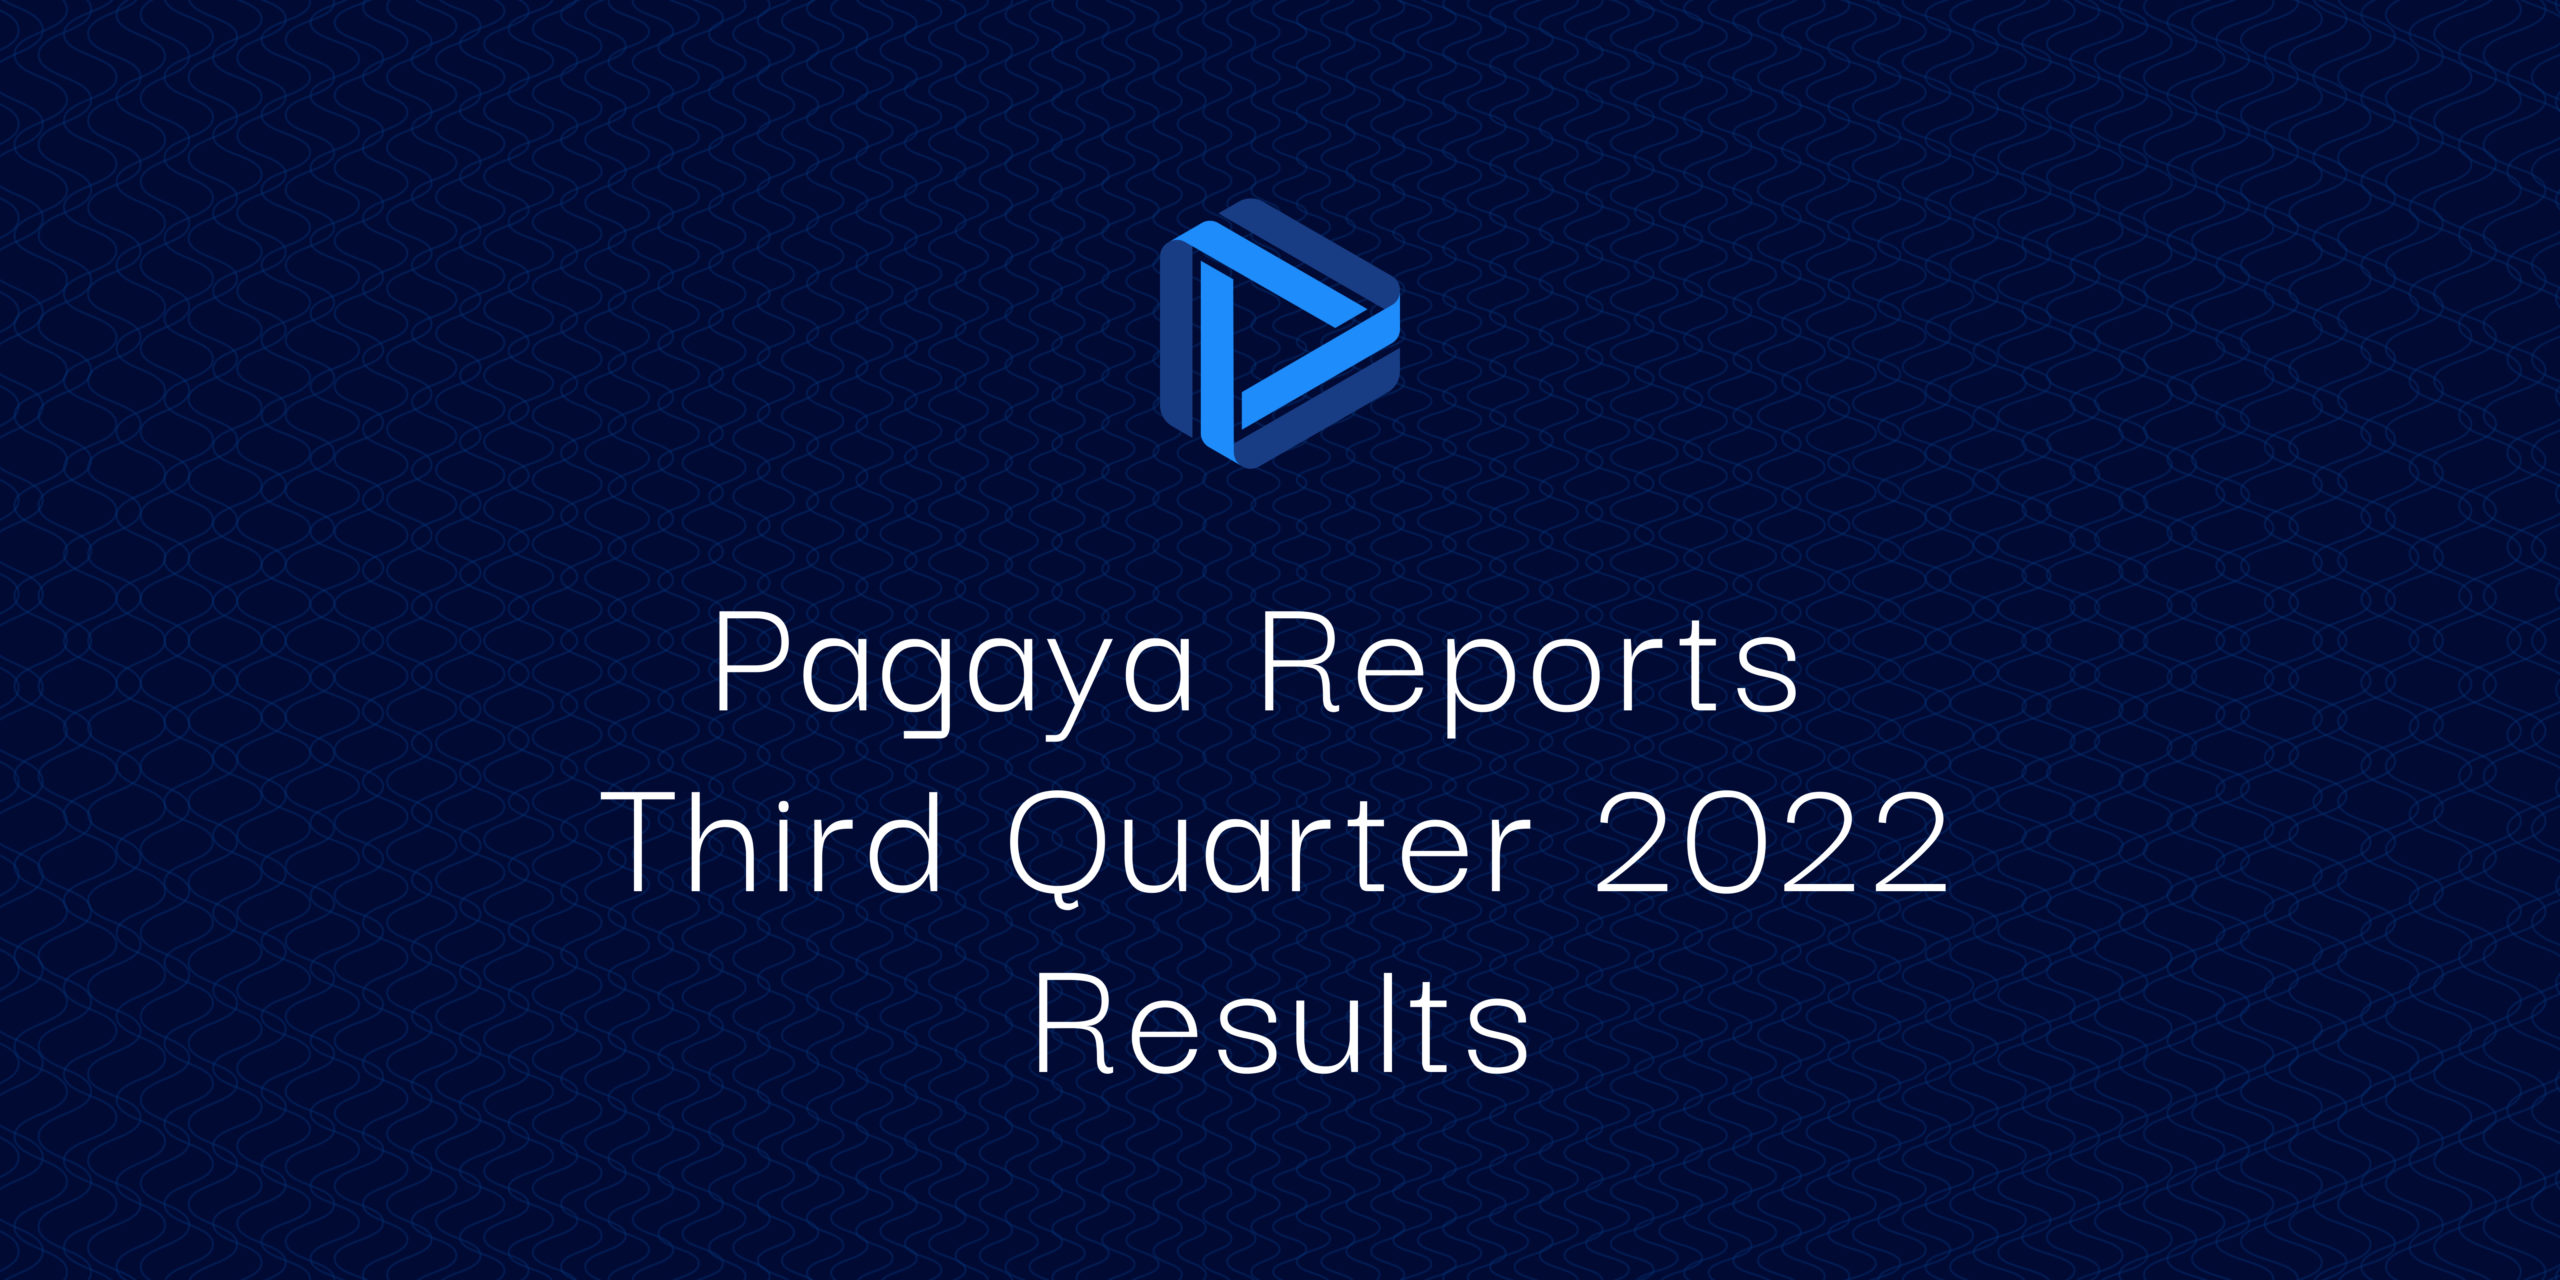 Pagaya Reports Third Quarter 2022 Results text on blue background with logo